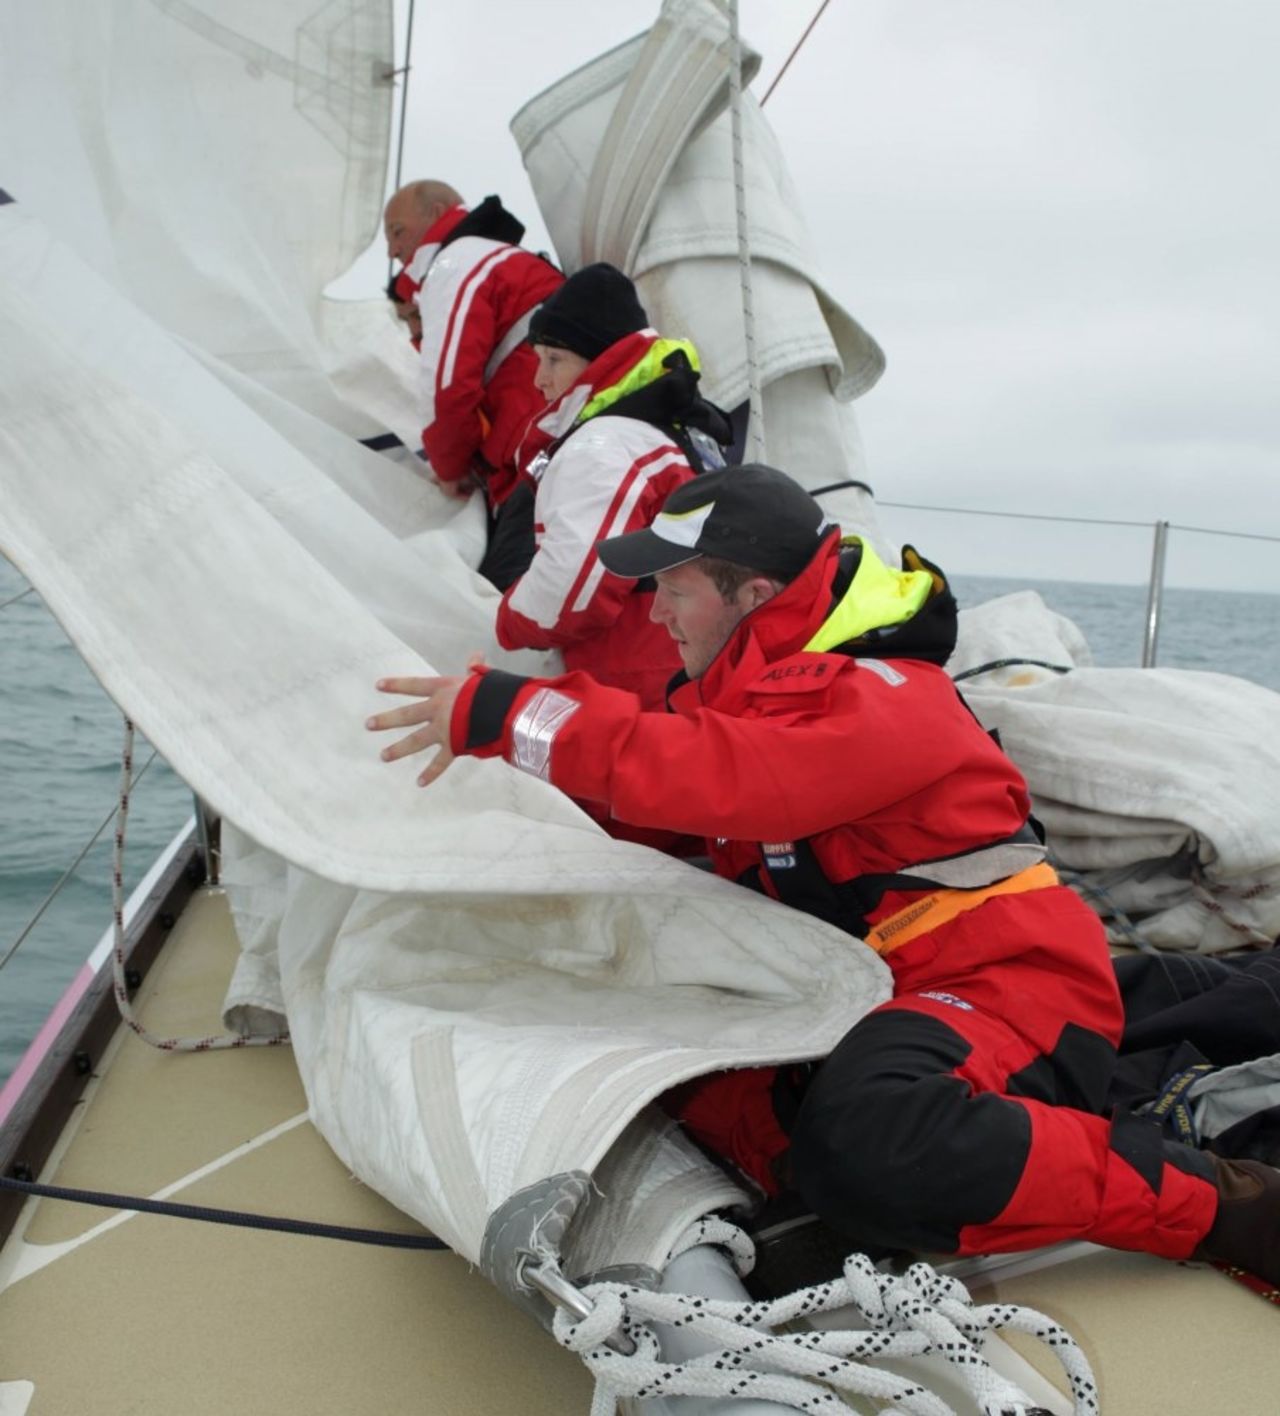 The majority of competitors have never sailed a boat in their lives. After a three-week intensive training course they're forced to quickly learn the ropes on the high seas.